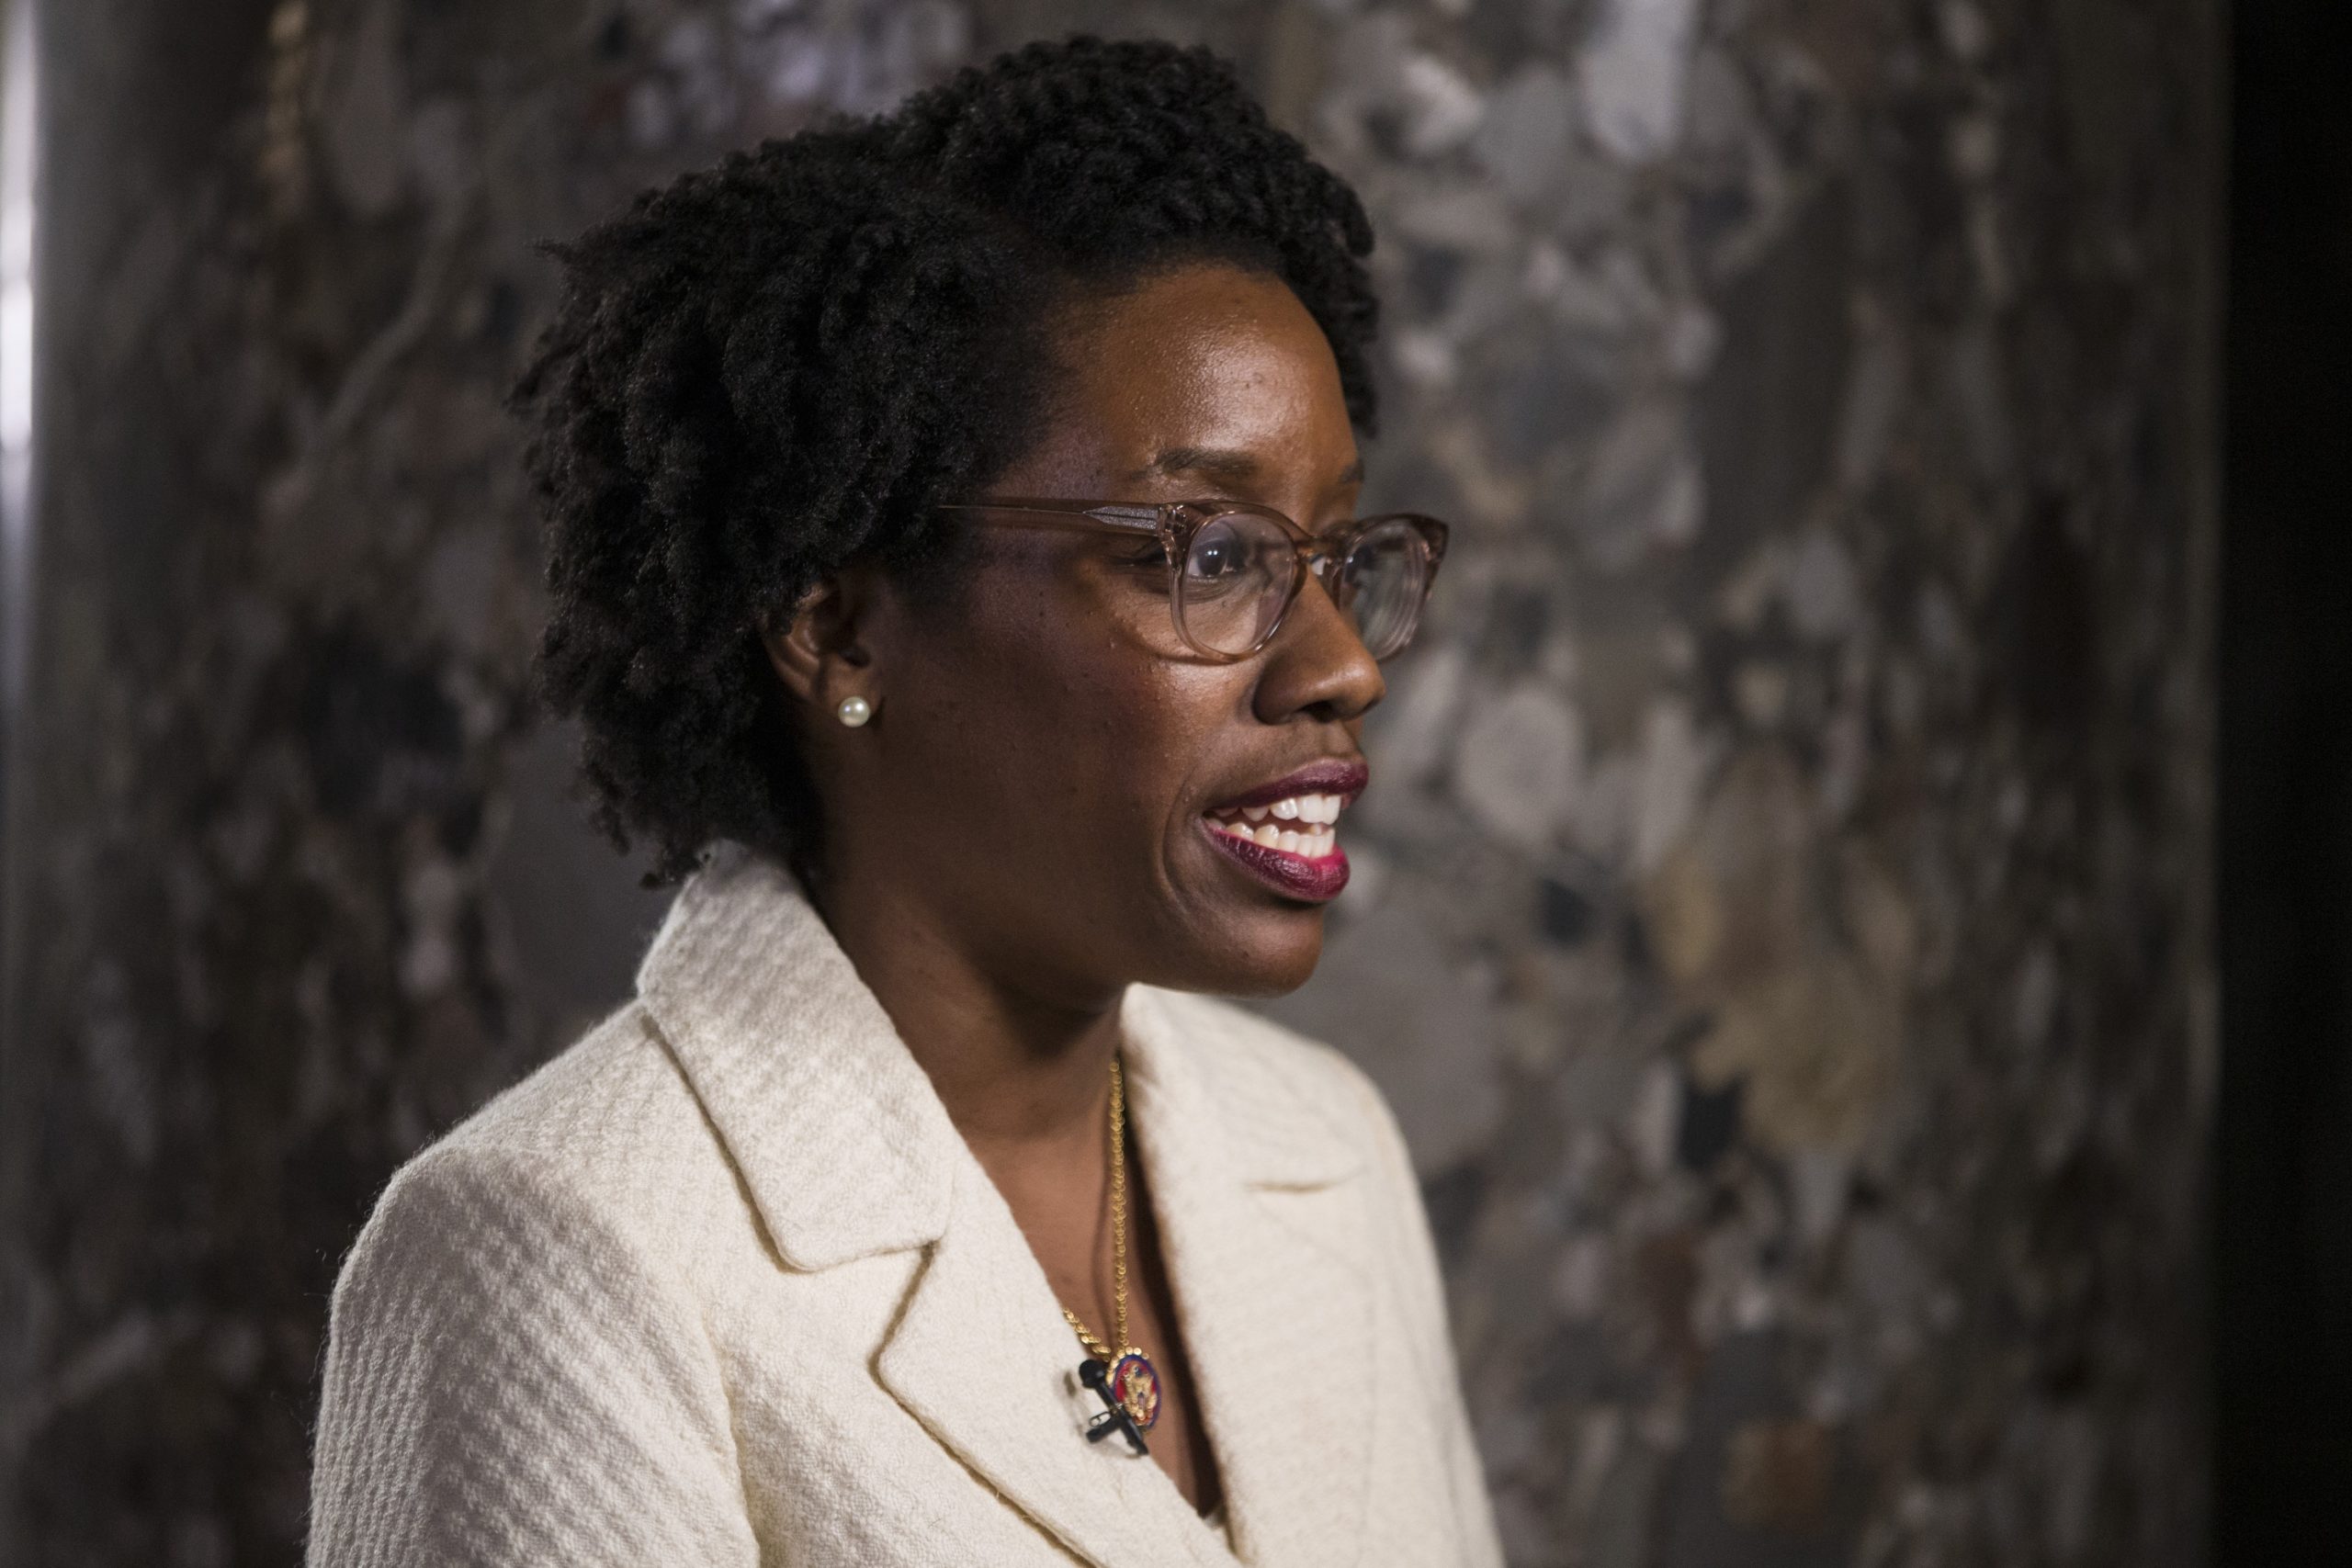 WASHINGTON, DC - FEBRUARY 05: Rep. Lauren Underwood (D-IL) speaks to members of the press ahead of the State of the Union address in the chamber of the U.S. House of Representatives at the U.S. Capitol Building on February 5, 2019 in Washington, DC. President Trump's second State of the Union address was postponed one week due to the partial government shutdown.  (Photo by Zach Gibson/Getty Images)